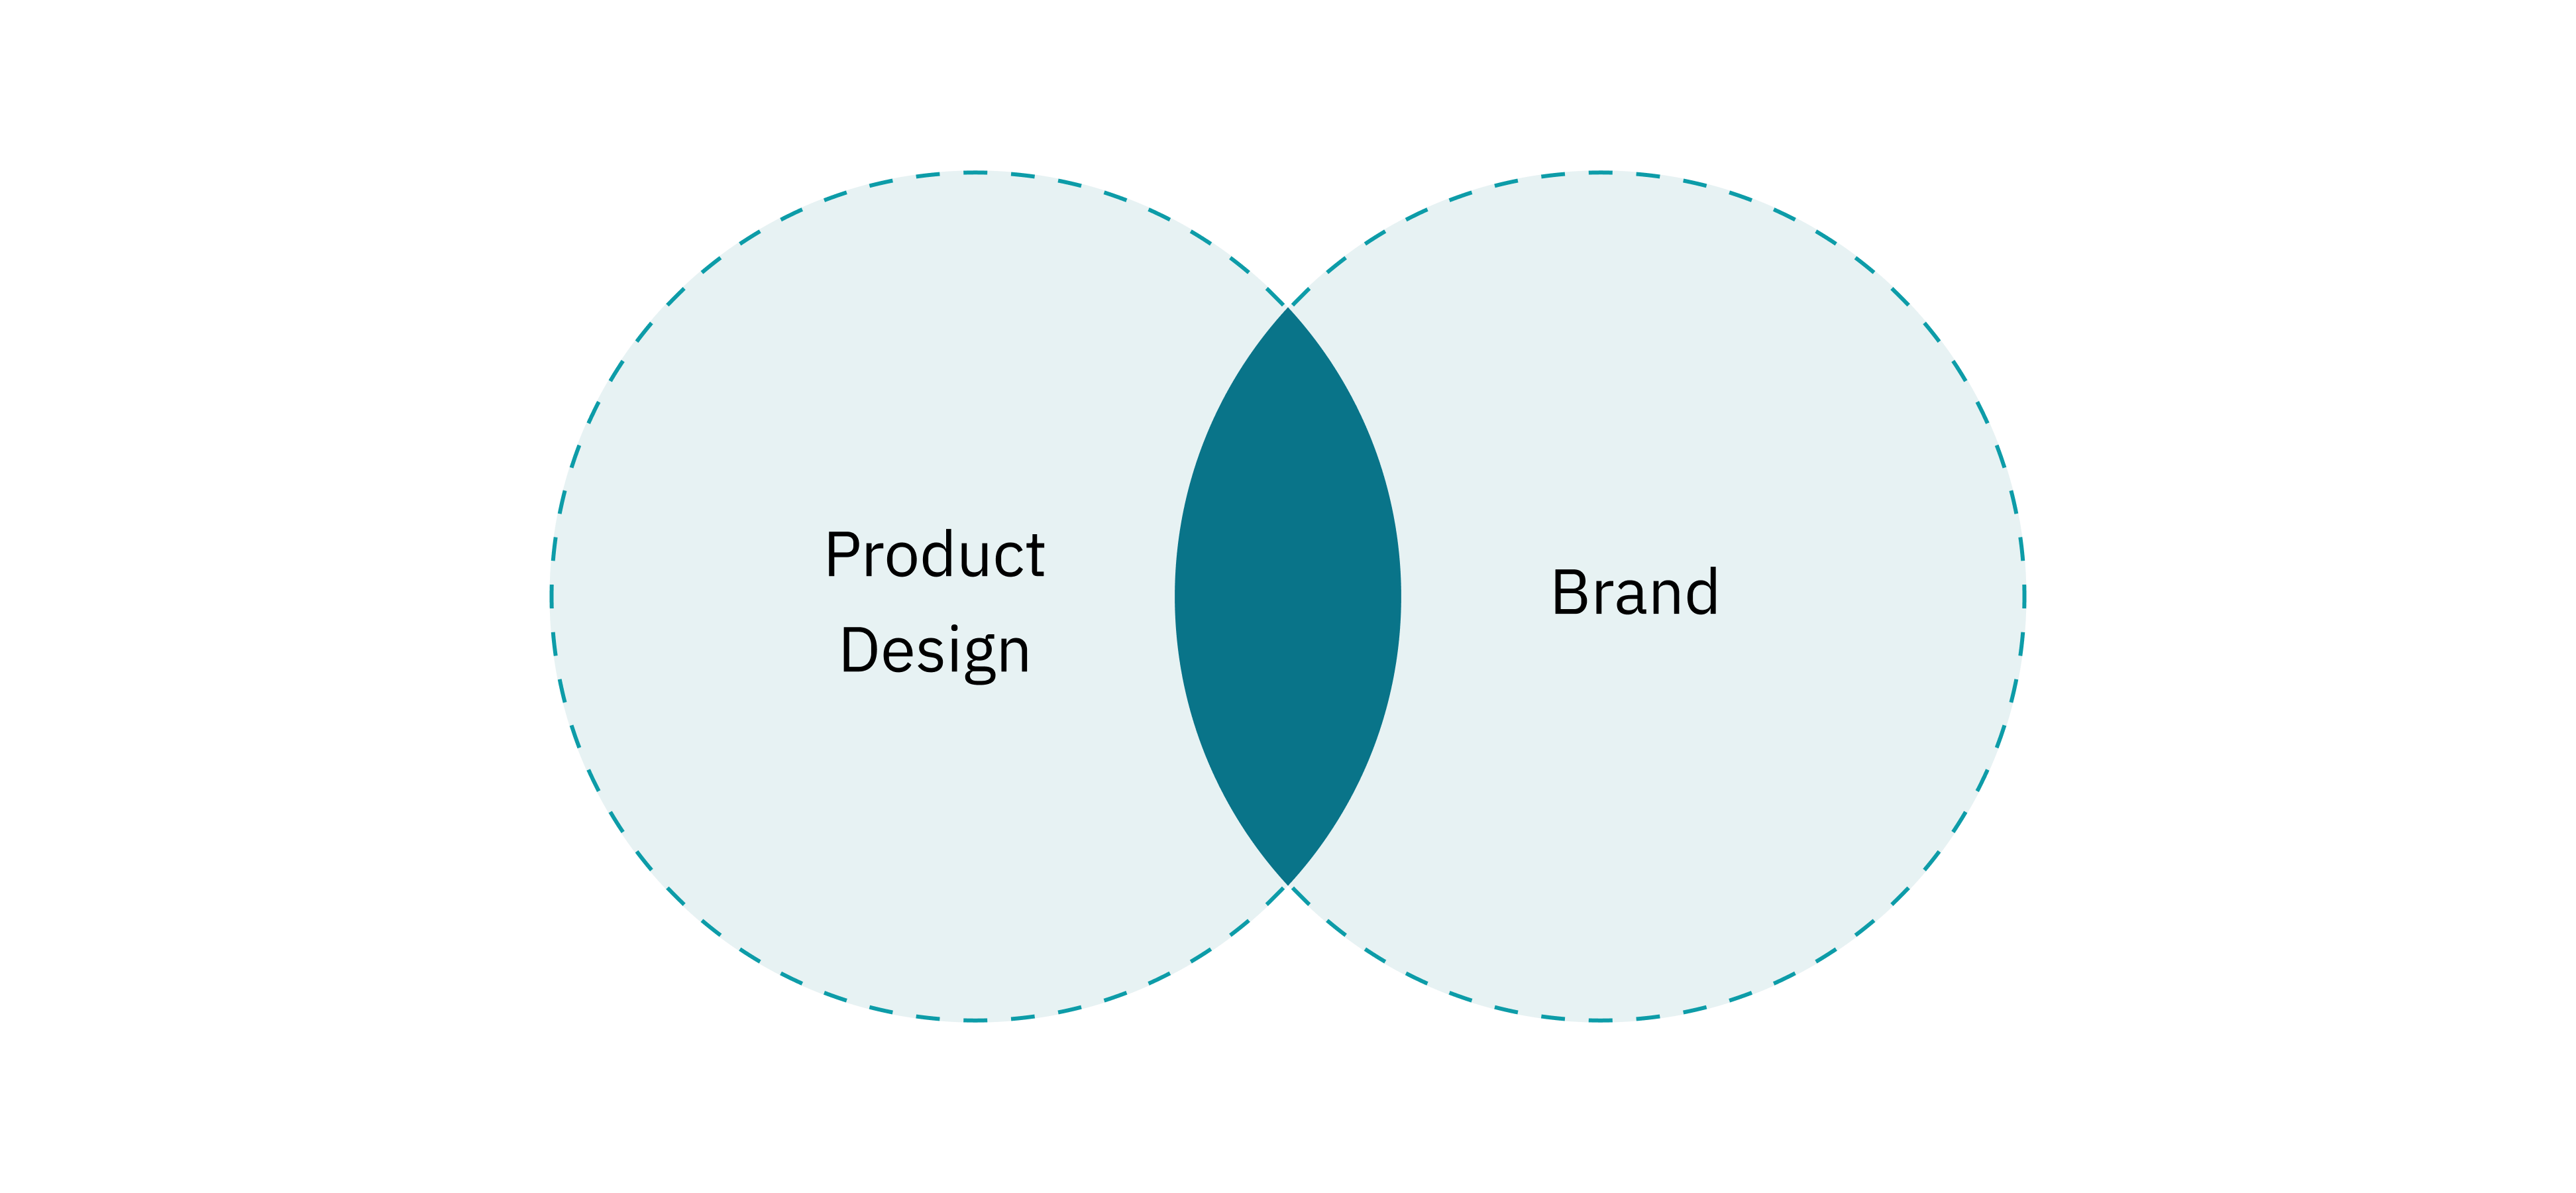 Venn diagram of the intersection between product design and branding.